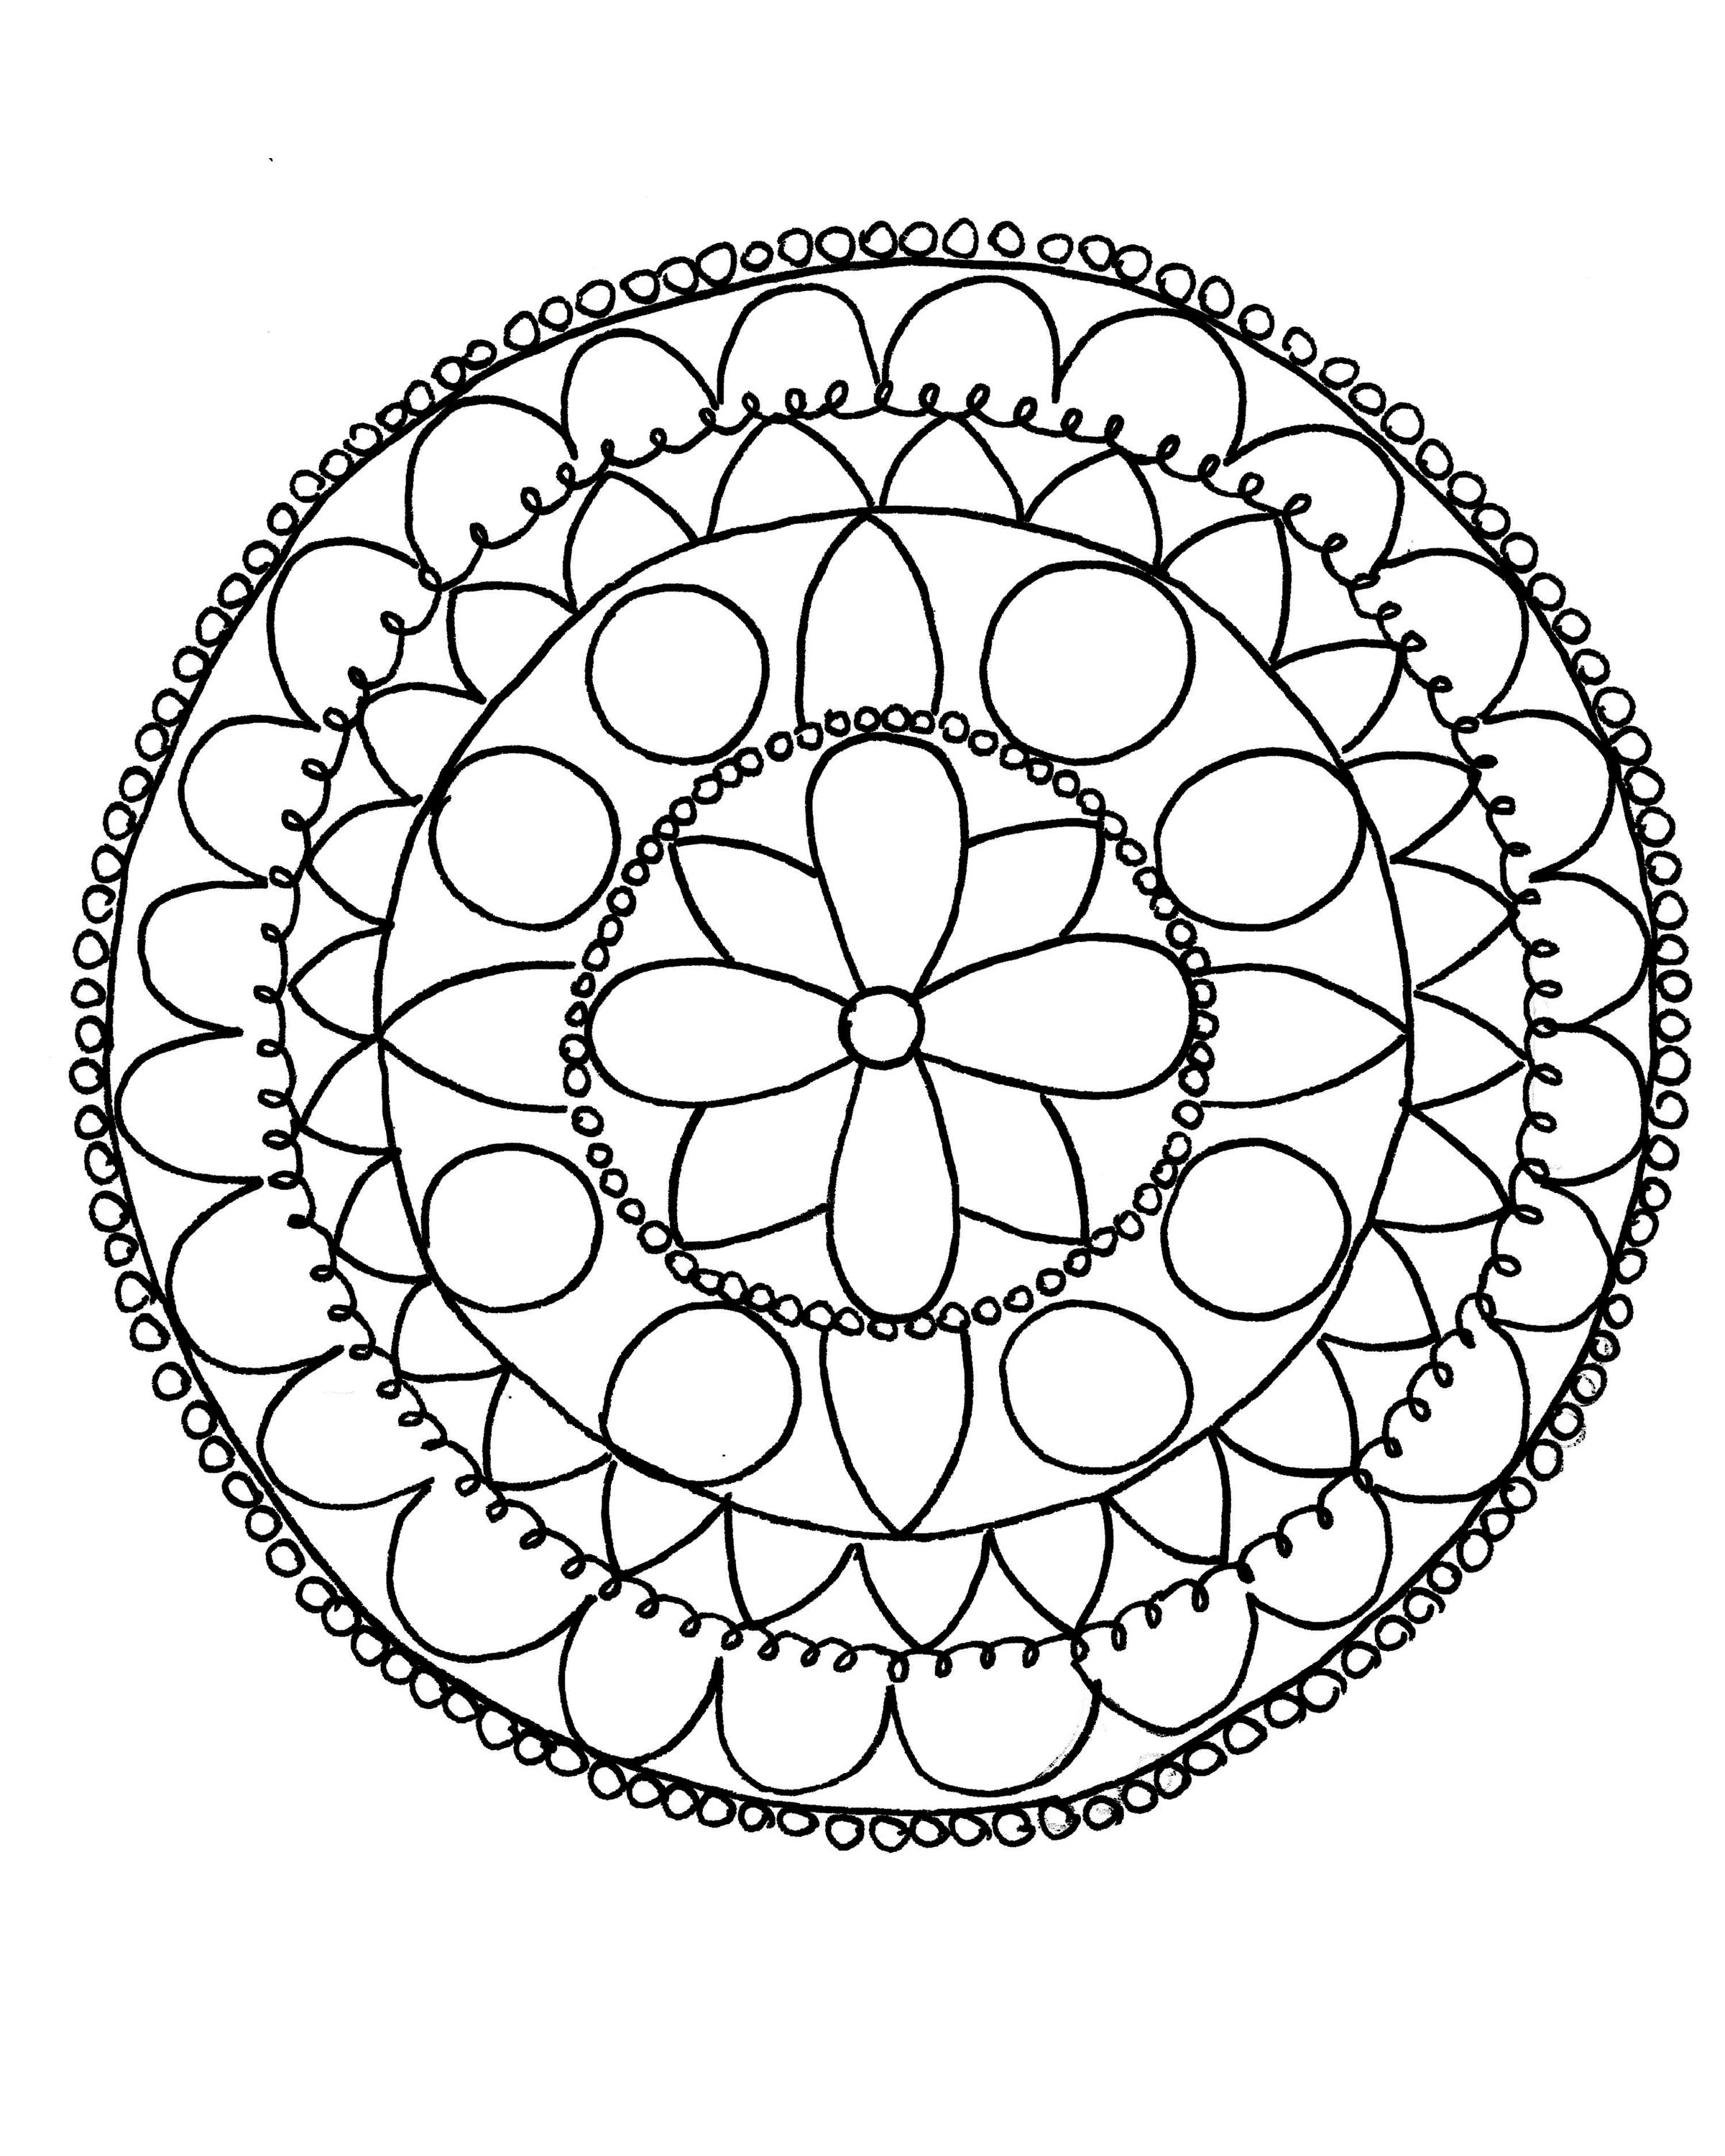 How to Draw a Mandala (With FREE Coloring Pages!)